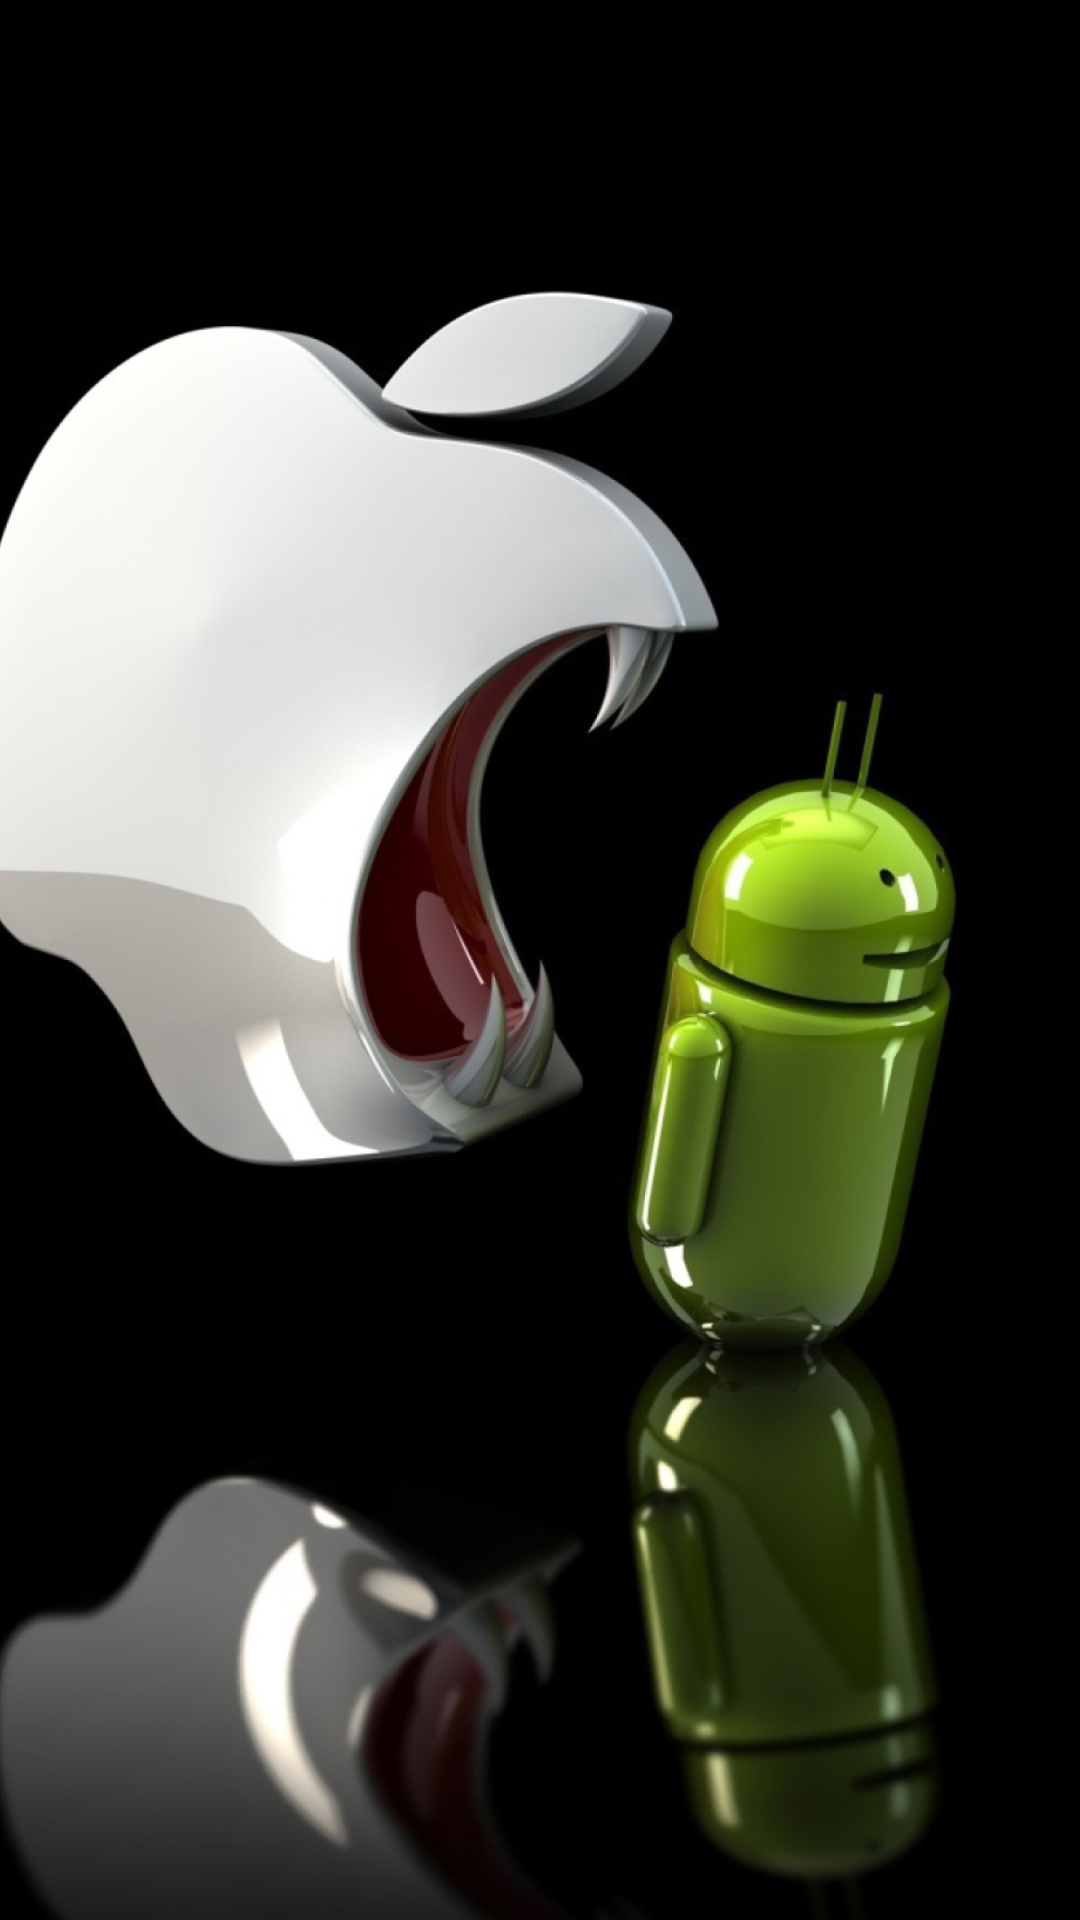 Apple Against Android wallpaper 1080x1920